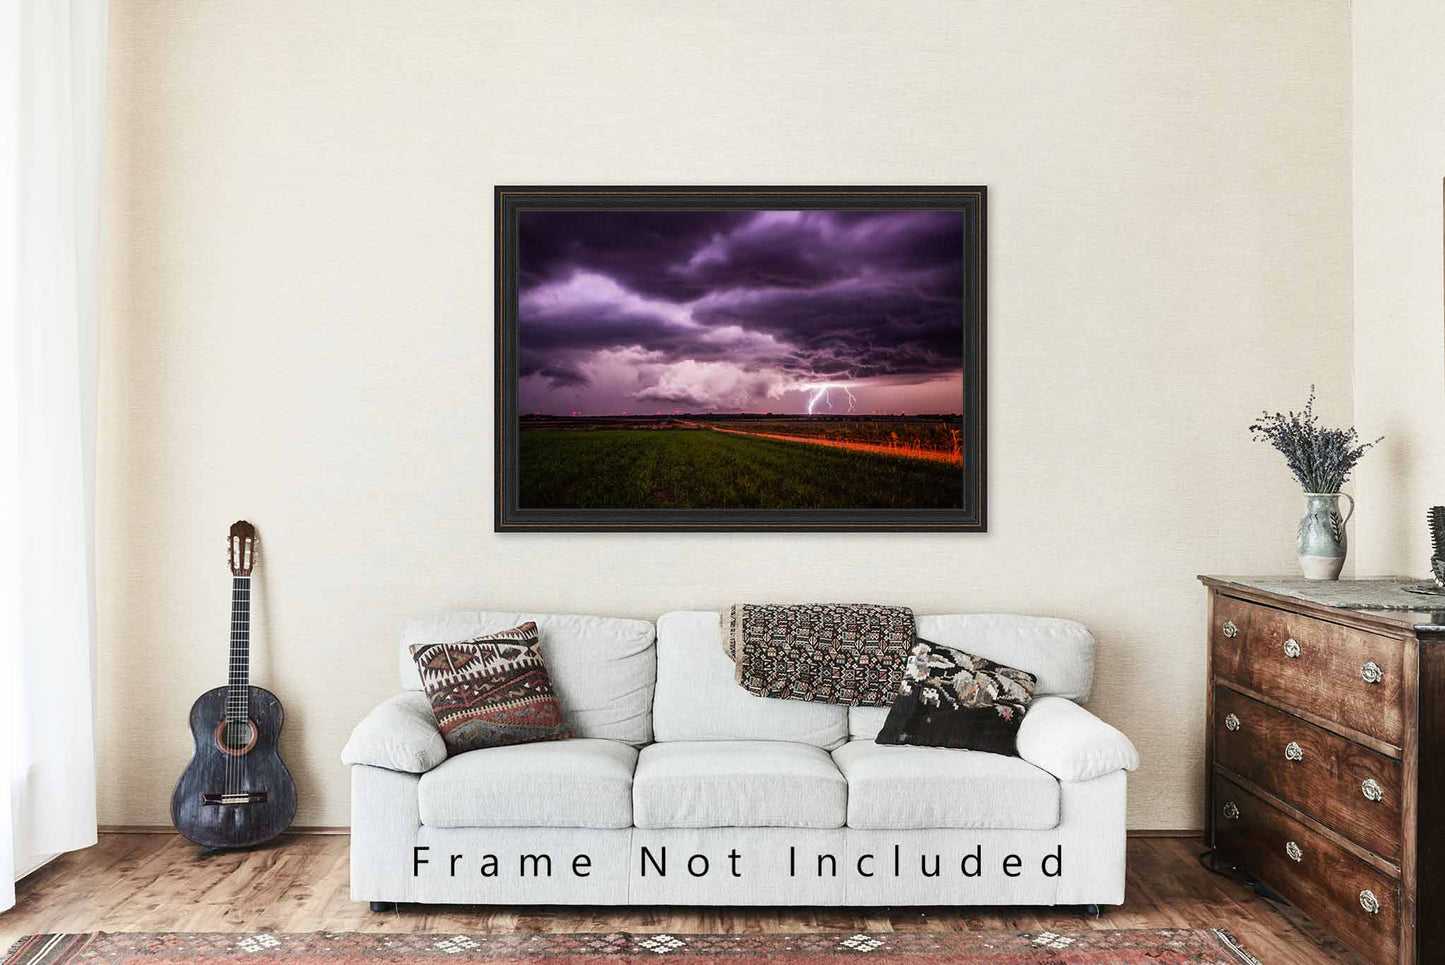 Storm Photography Print - Wall Art Picture of Lightning Strike on Stormy Night in Kansas Weather Landscape Artwork Decor 4x6 to 40x60